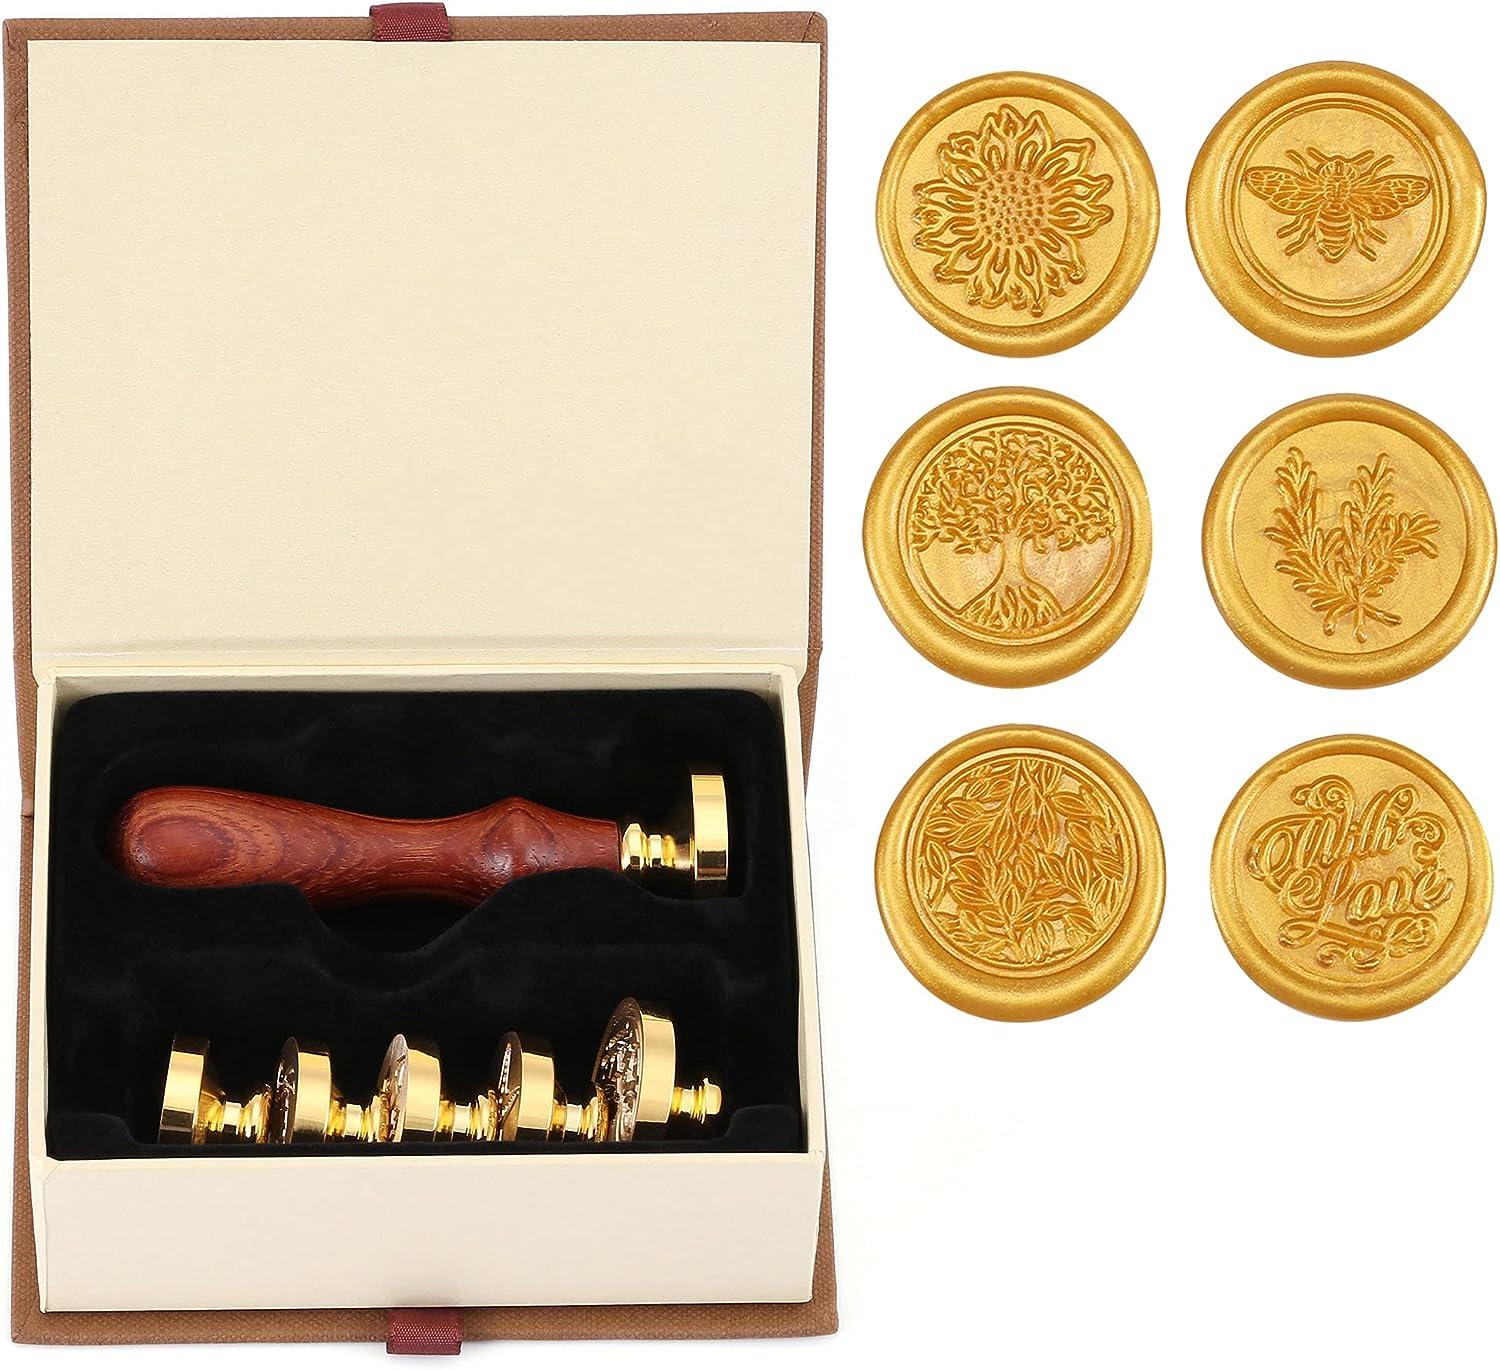 Wax Seal Stamp Set, 6 Pieces Sealing Wax Stamps Love Copper Seals 1 Wooden Handle, Wax Stamp Kit for Cards Envelopes Invitations Wine Packages